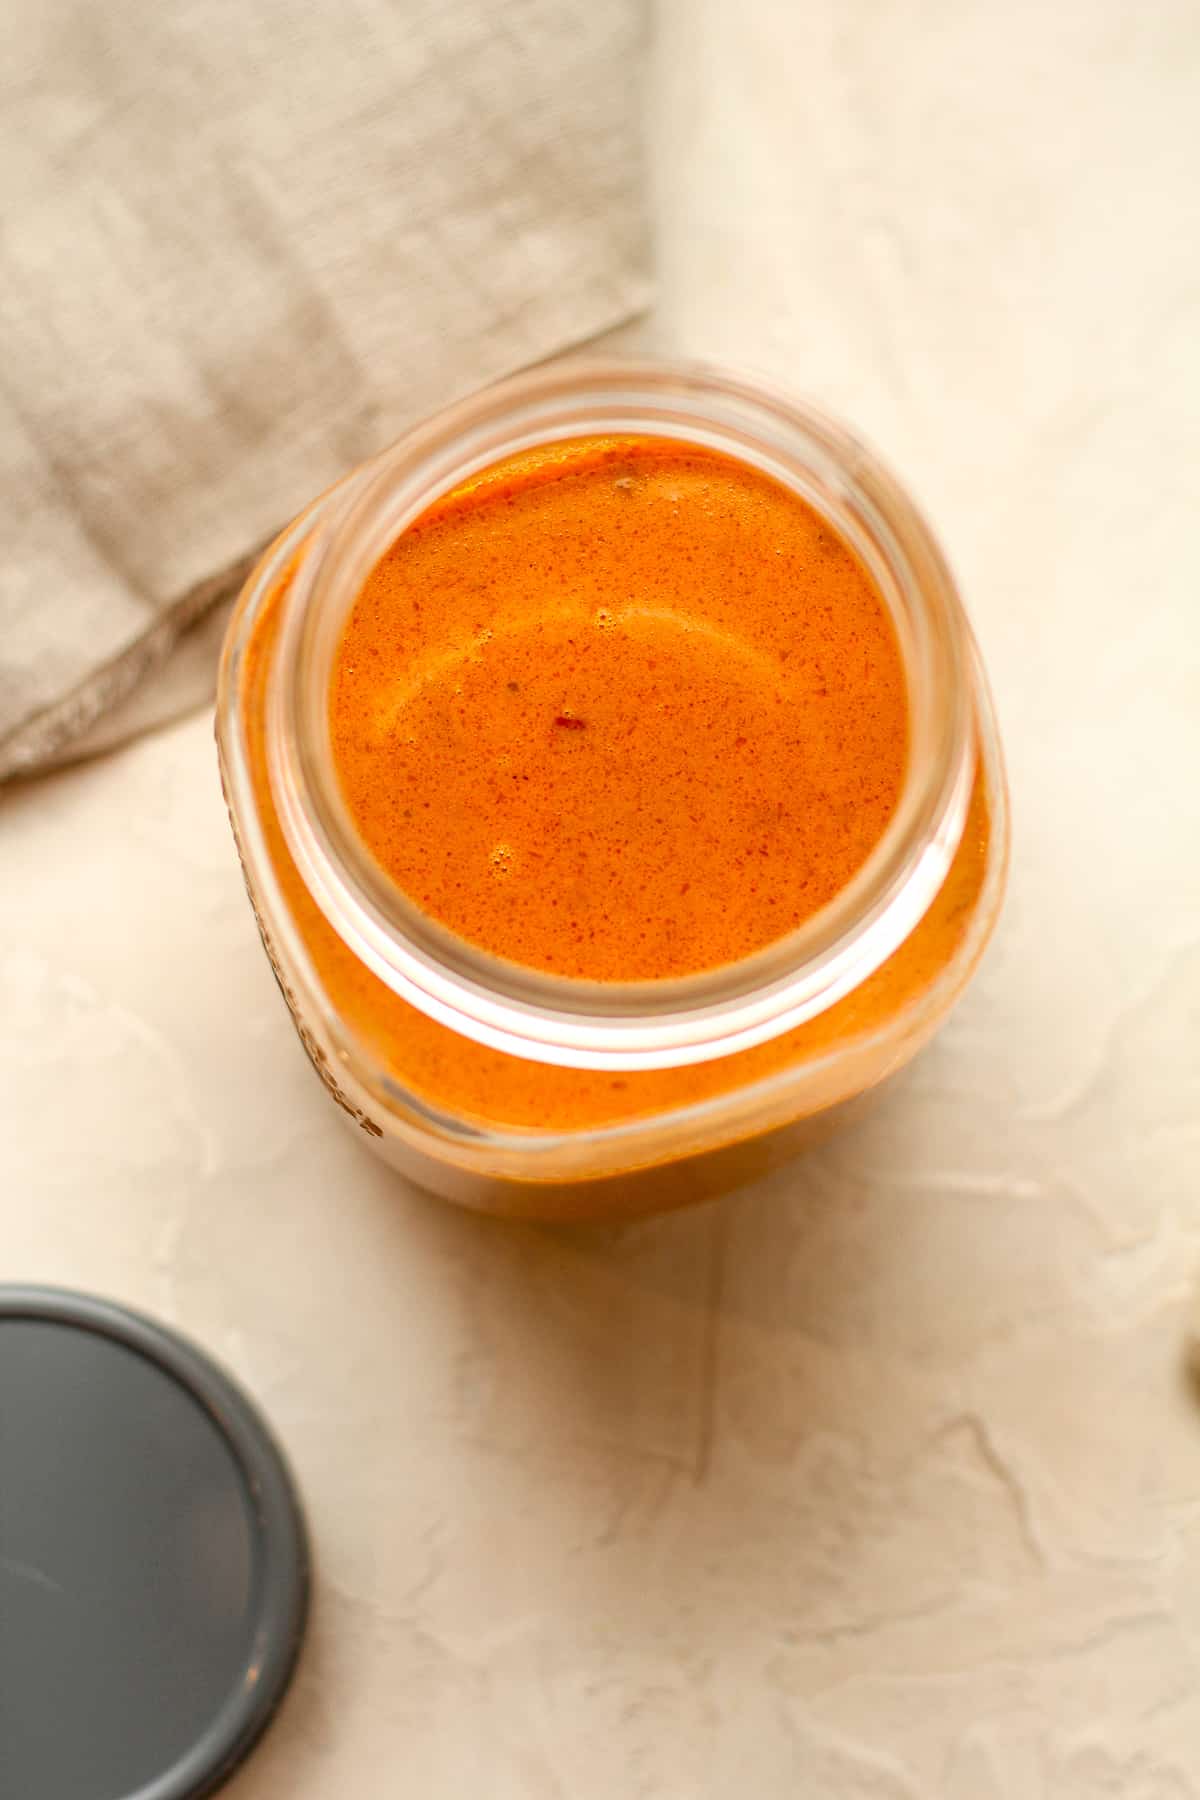 Overhead view of a jar of curry sauce.